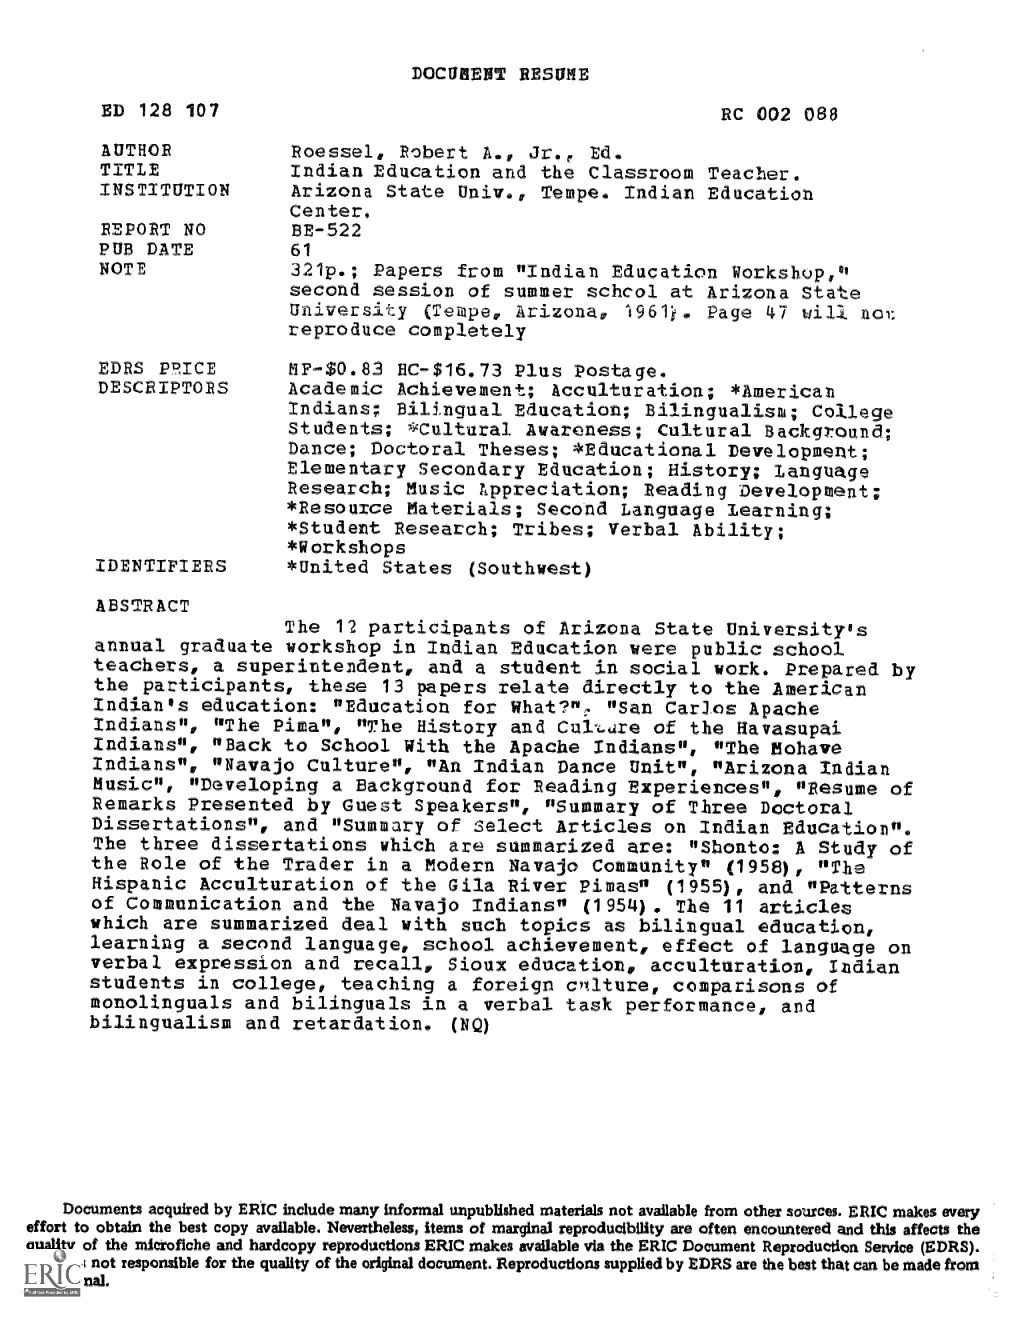 DOCUMENT RESUME ED 128 107 RC 002 088 AUTHOR Roessel, Robert A., Jr., Ed. TITLE Indian Education and the Classroom Teacher. INST